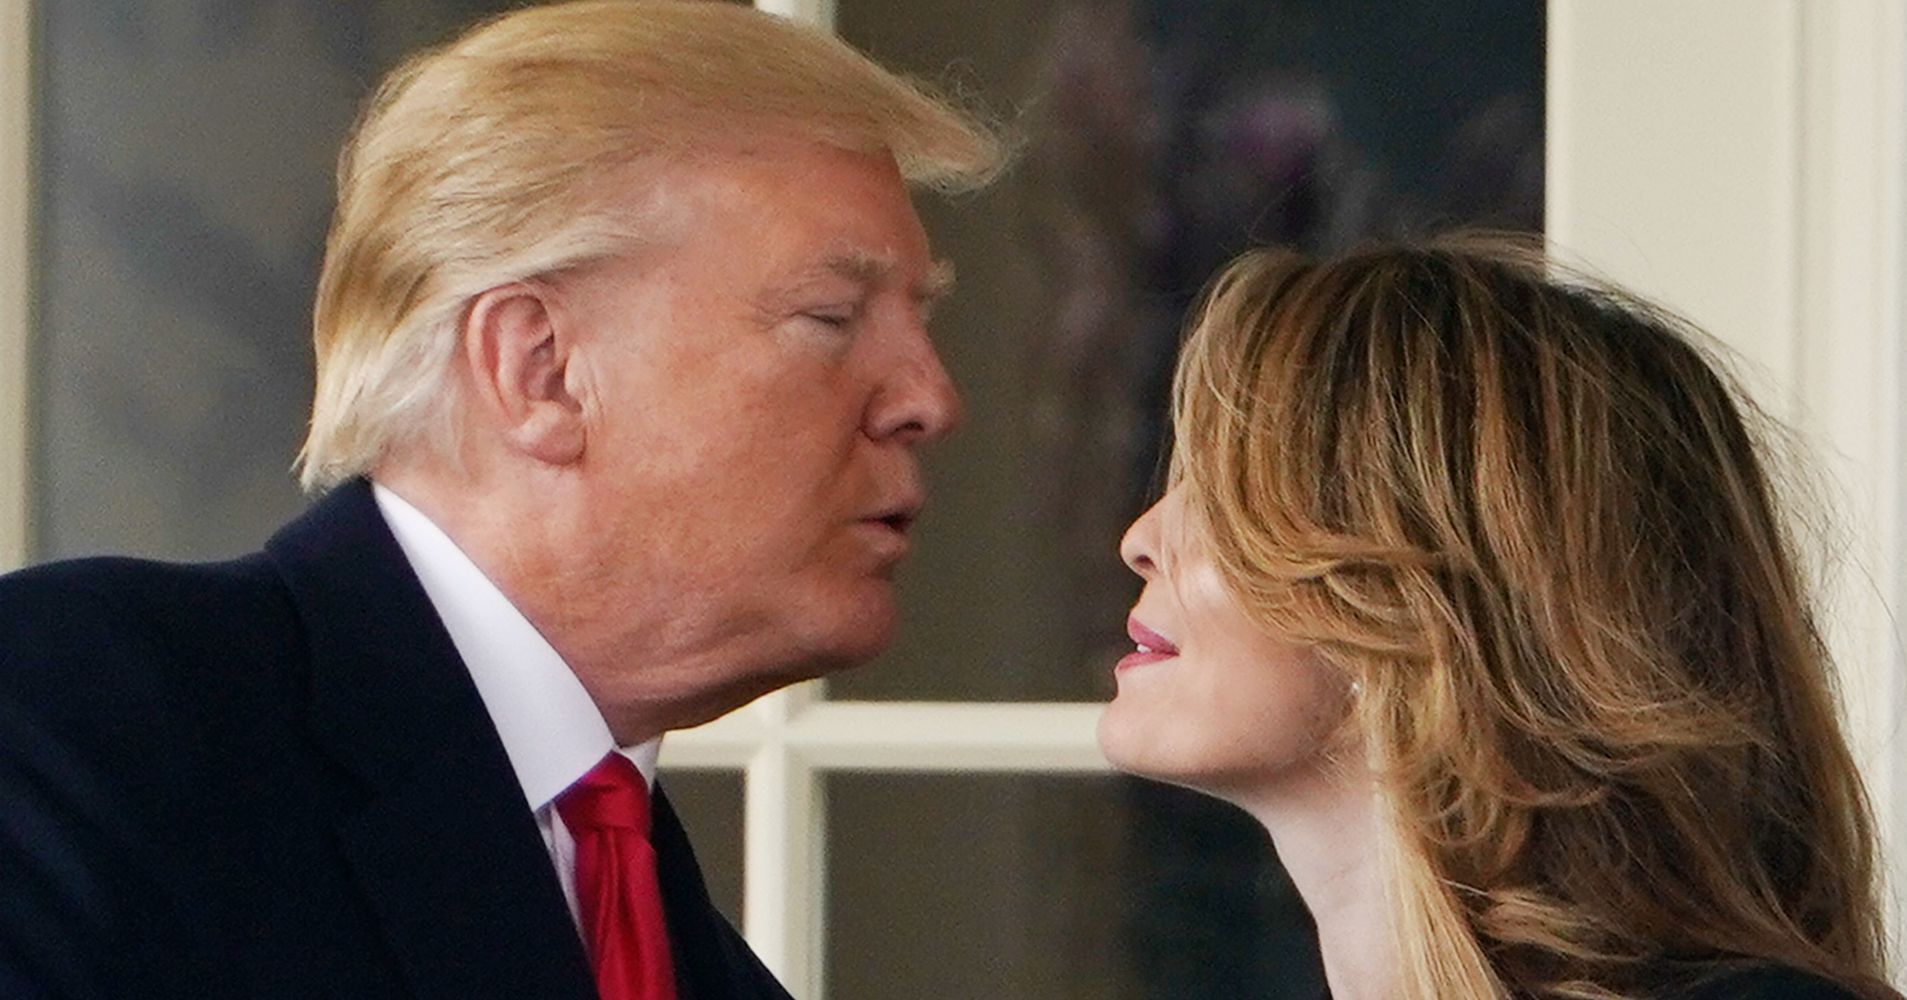 Donald Trump Awkwardly Kissed Hope Hicks Goodbye, And It Became A Hilarious New Meme ...